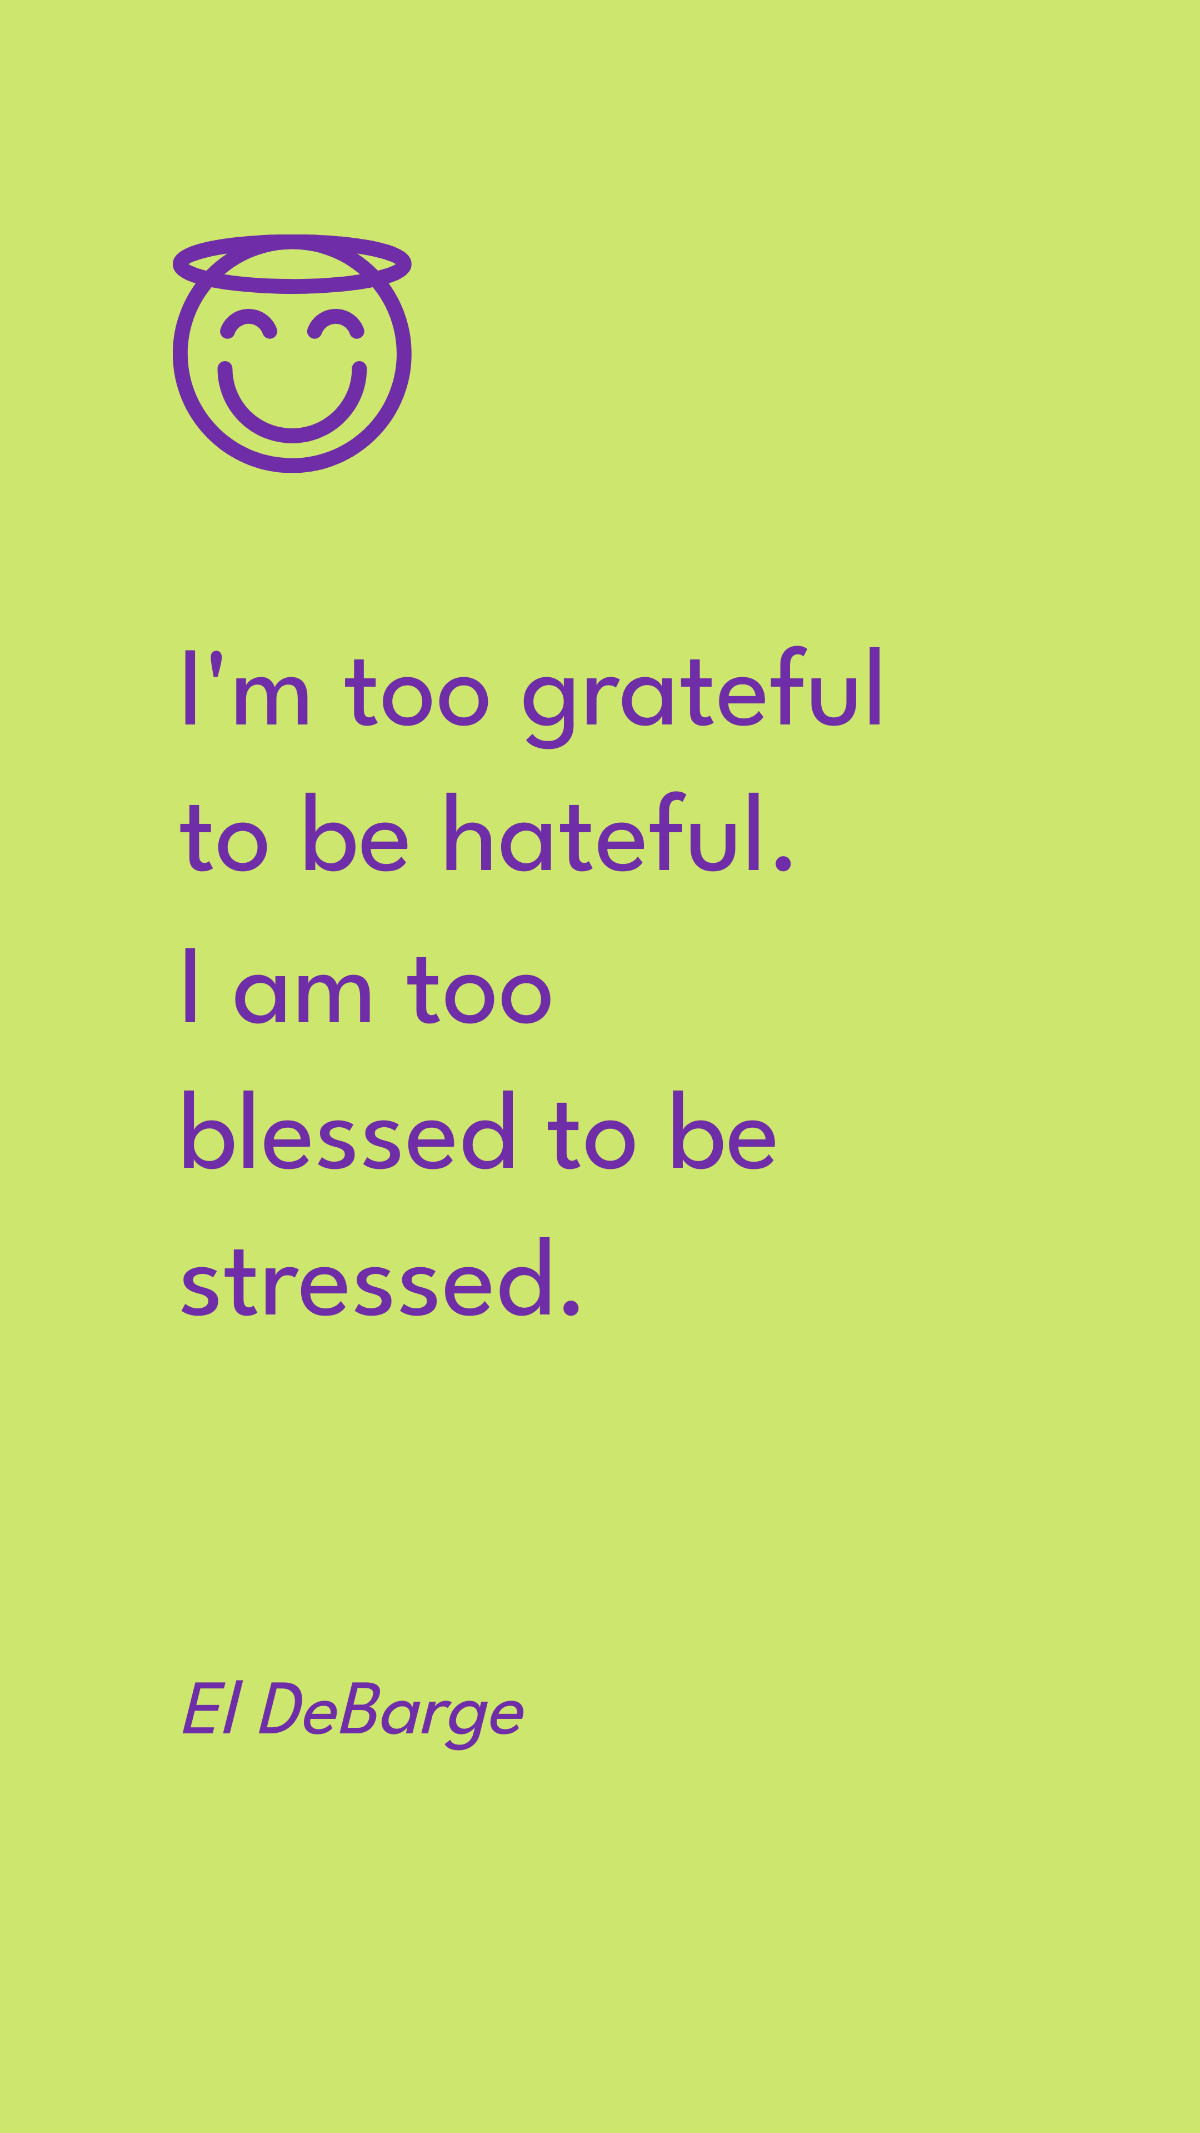 El DeBarge - I'm too grateful to be hateful. I am too blessed to be stressed. Template